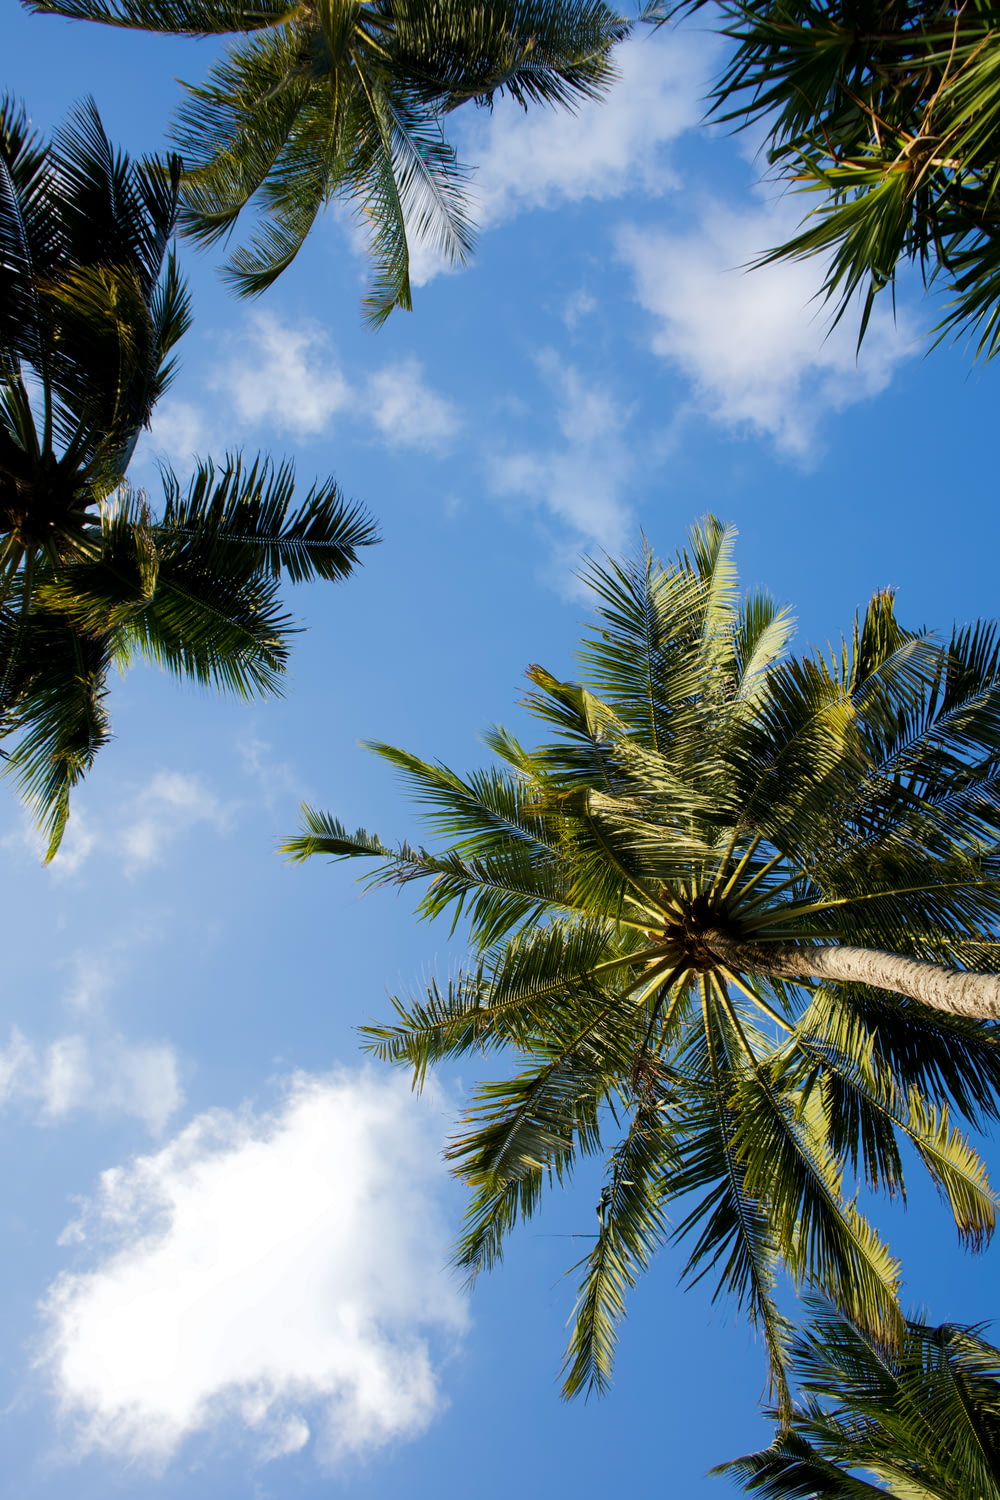 palm trees against a blue sky with clouds